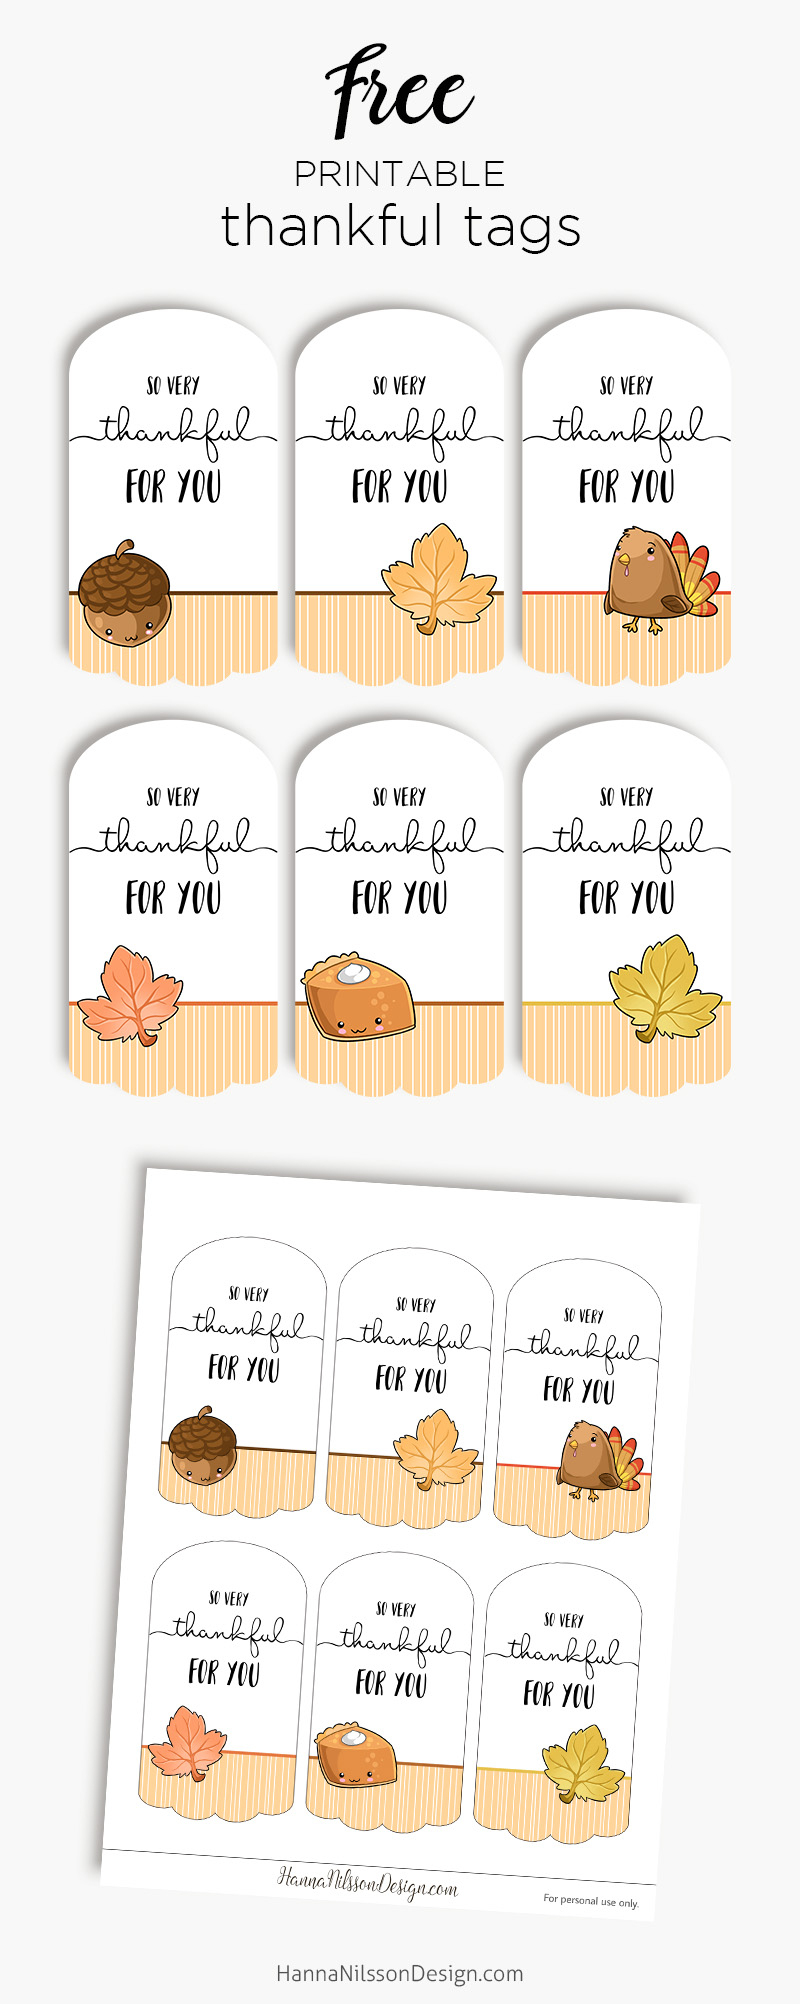 Thankful For You Tags| Free Printable Tags For Thanksgiving Gifts - Thankful For You Free Printable Tags